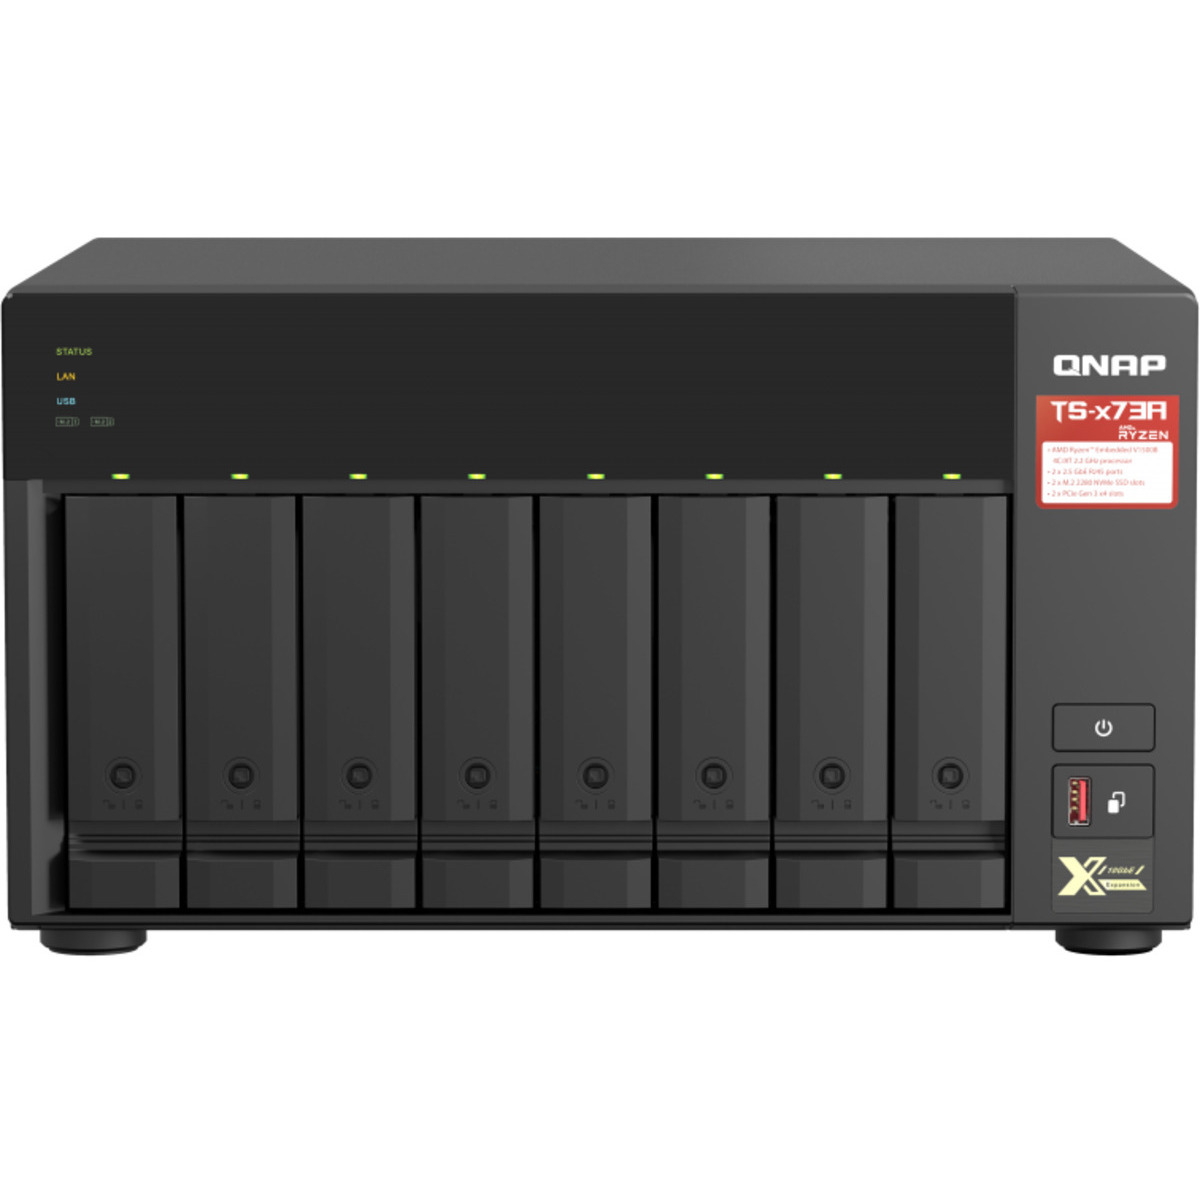 QNAP TS-873A 60tb 8-Bay Desktop Multimedia / Power User / Business NAS - Network Attached Storage Device 5x12tb Western Digital Red Pro WD121KFBX 3.5 7200rpm SATA 6Gb/s HDD NAS Class Drives Installed - Burn-In Tested TS-873A